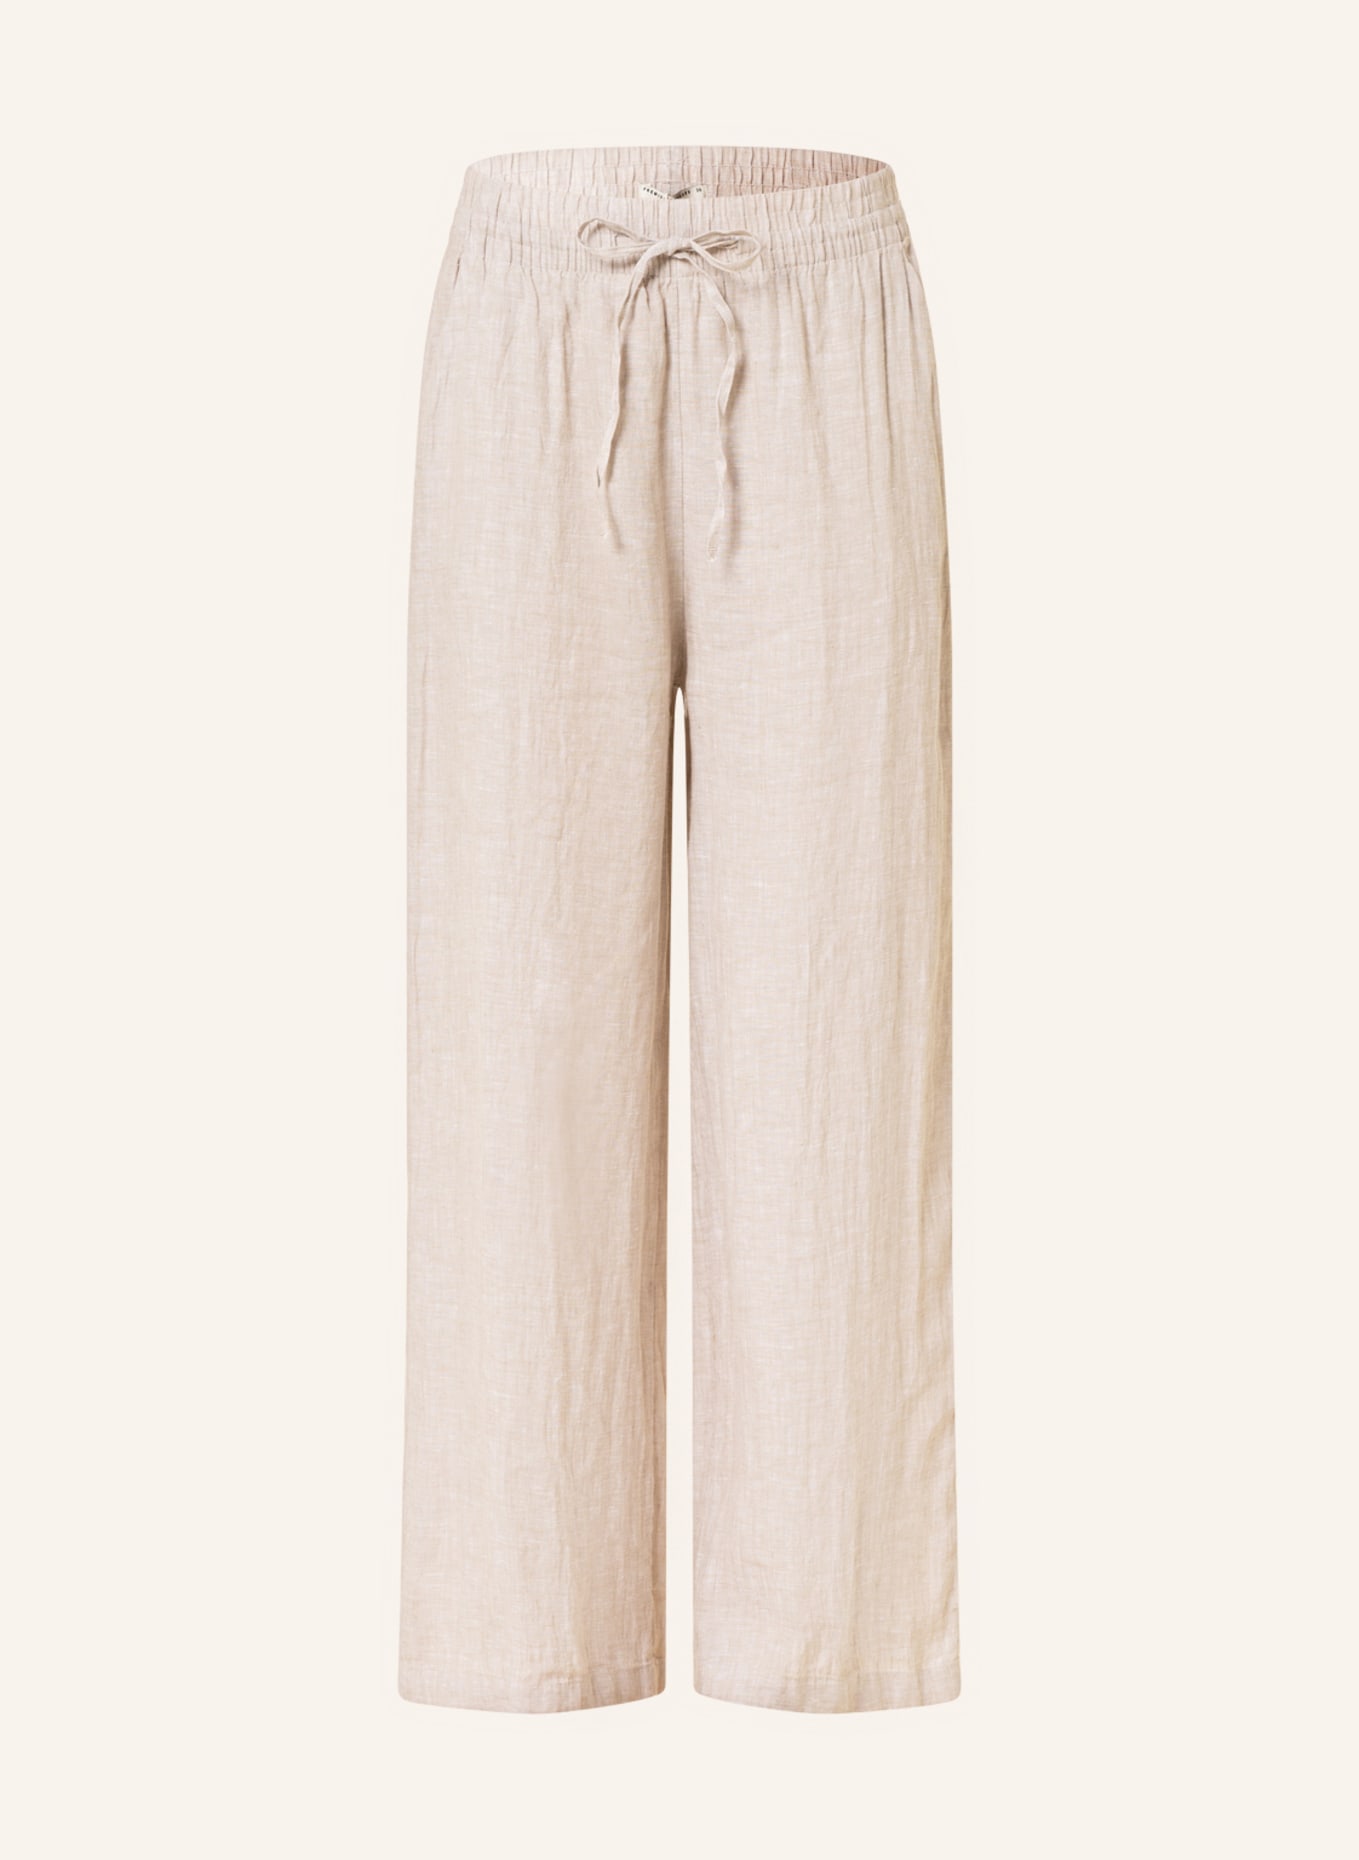 Gina Tricot Low Waist Trousers - Clothing - Boozt.com